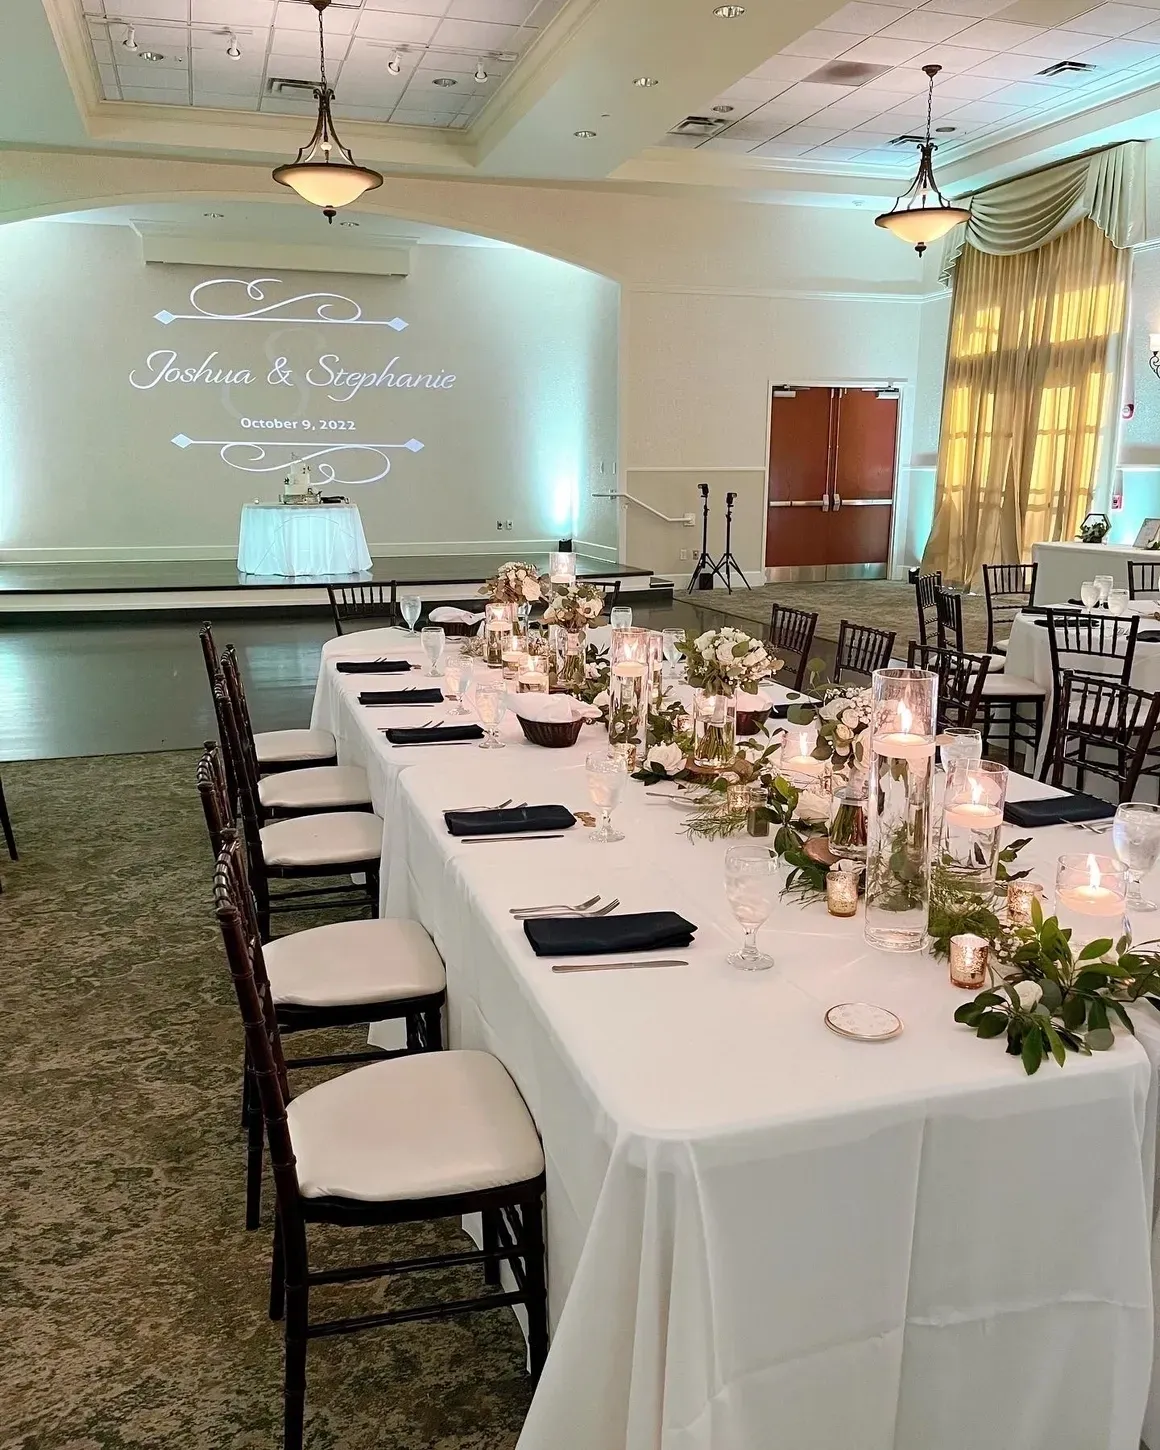 A long table with white linens and black chairs.